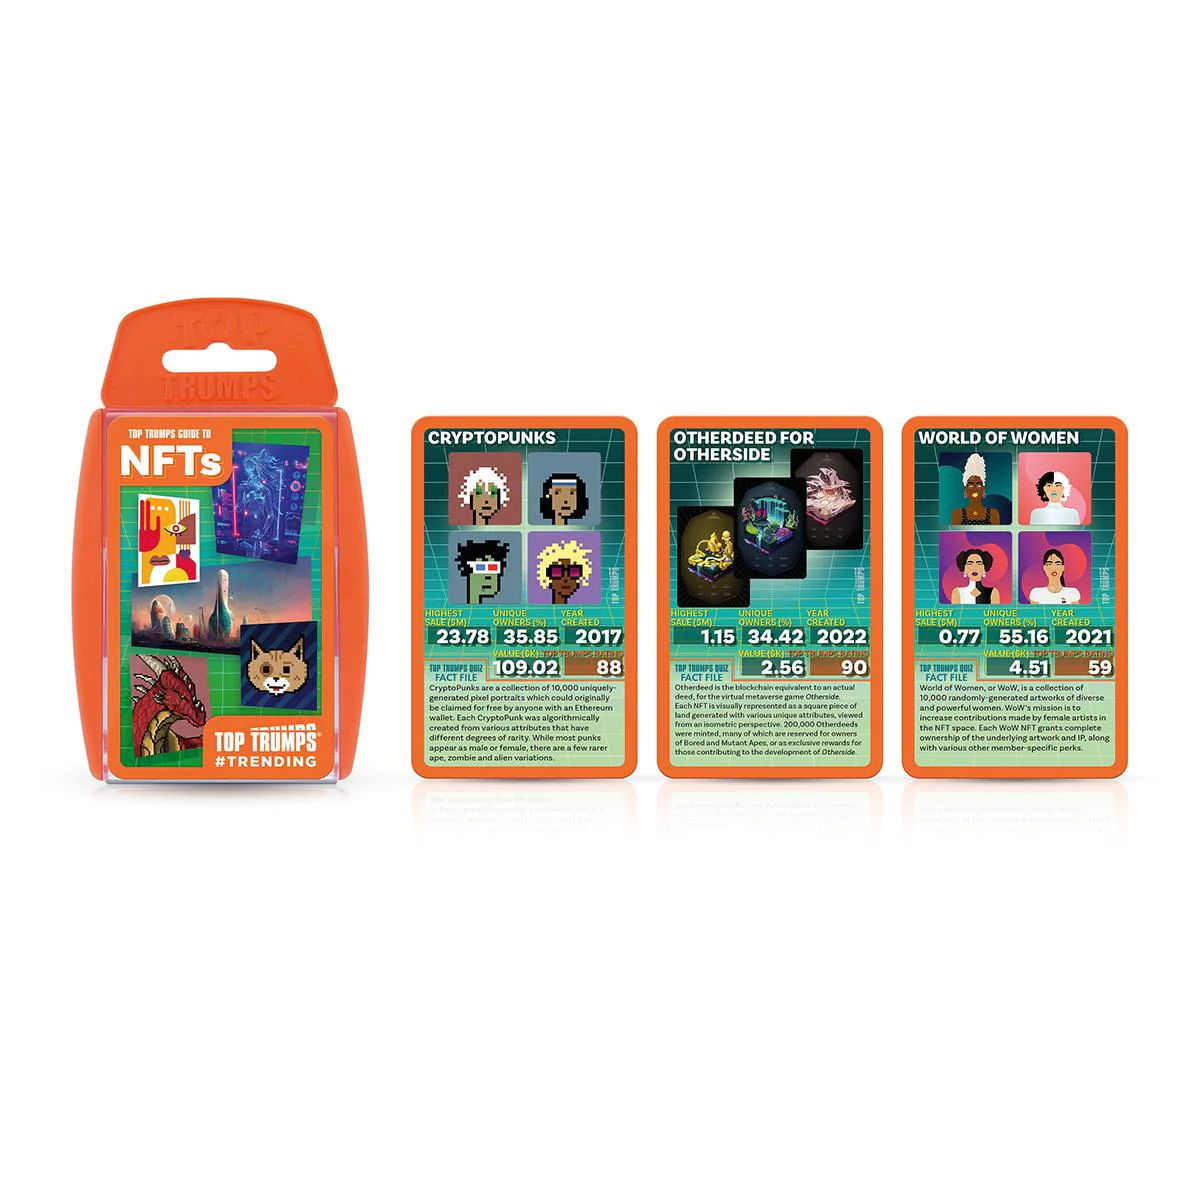 Top Trumps Guide To NFTs - cue debate about whether the cards themselves are non-fungible